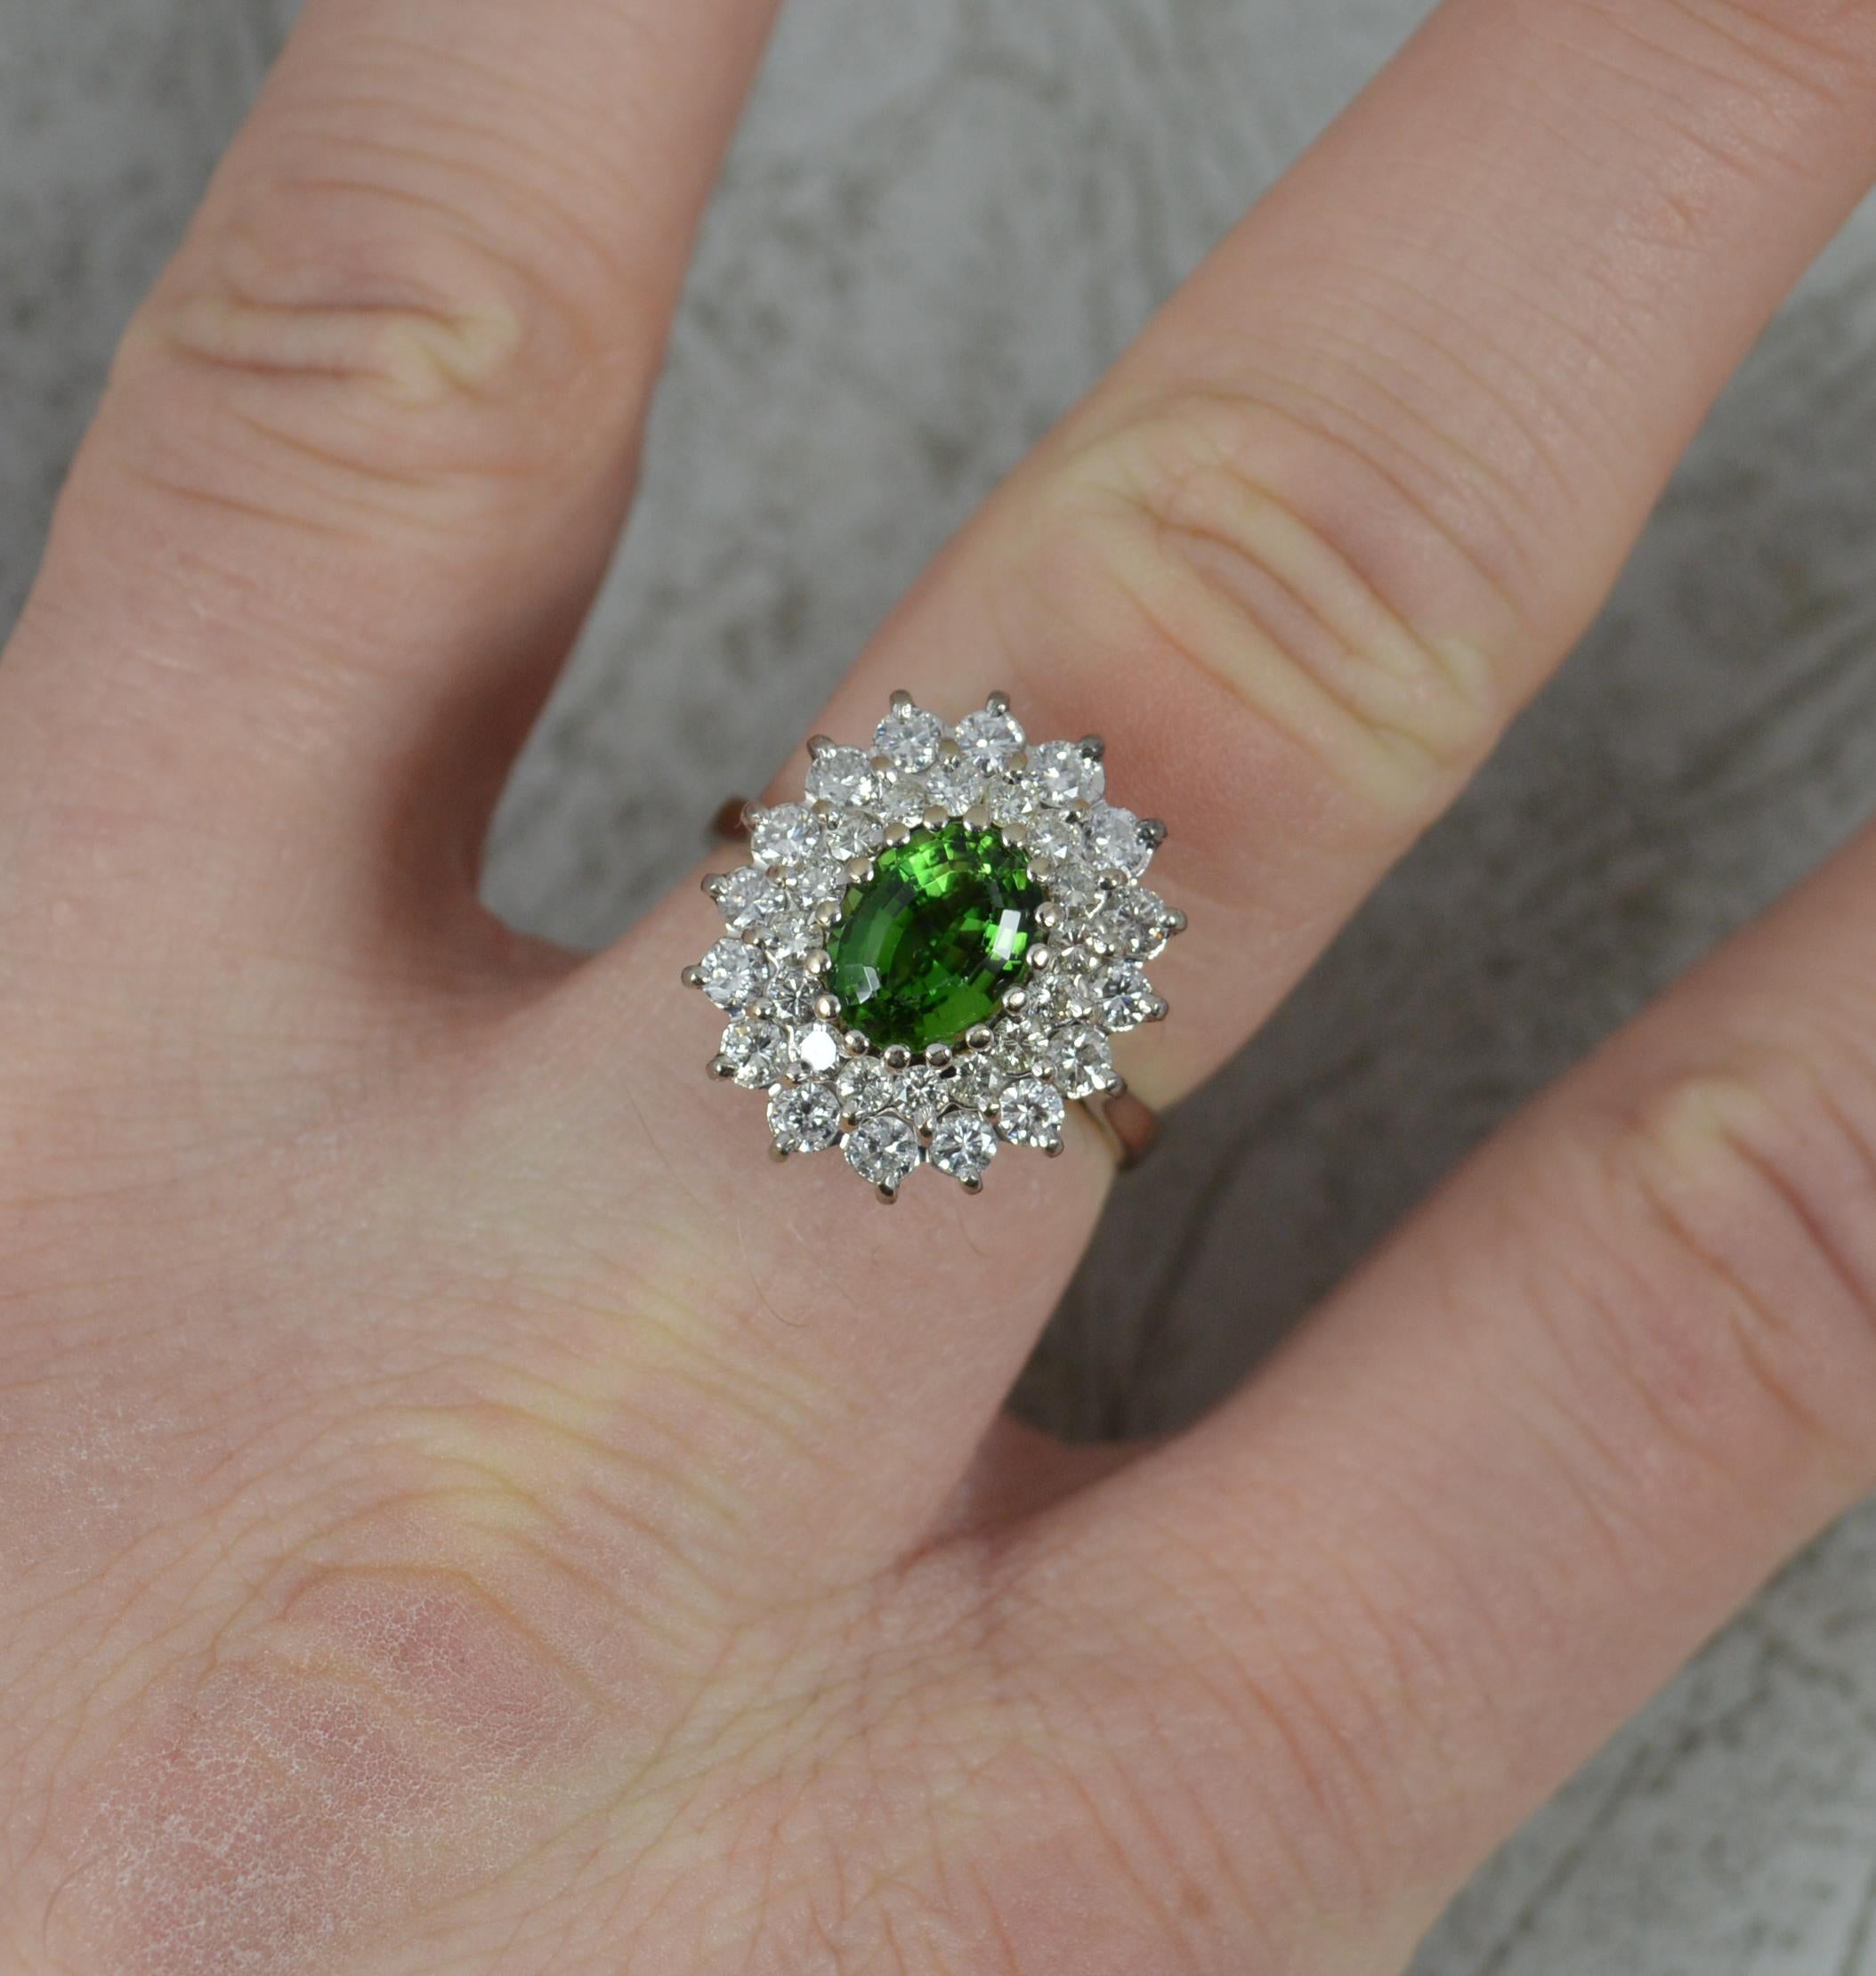 A superb contemporary cluster ring.
Solid 18 carat gold example. Well made substantial piece.
Designed with an oval cut green tourmaline to the centre. 6mm x 8mm. Surrounding are two tiers of round brilliant cut diamonds of two sizes. Total diamond